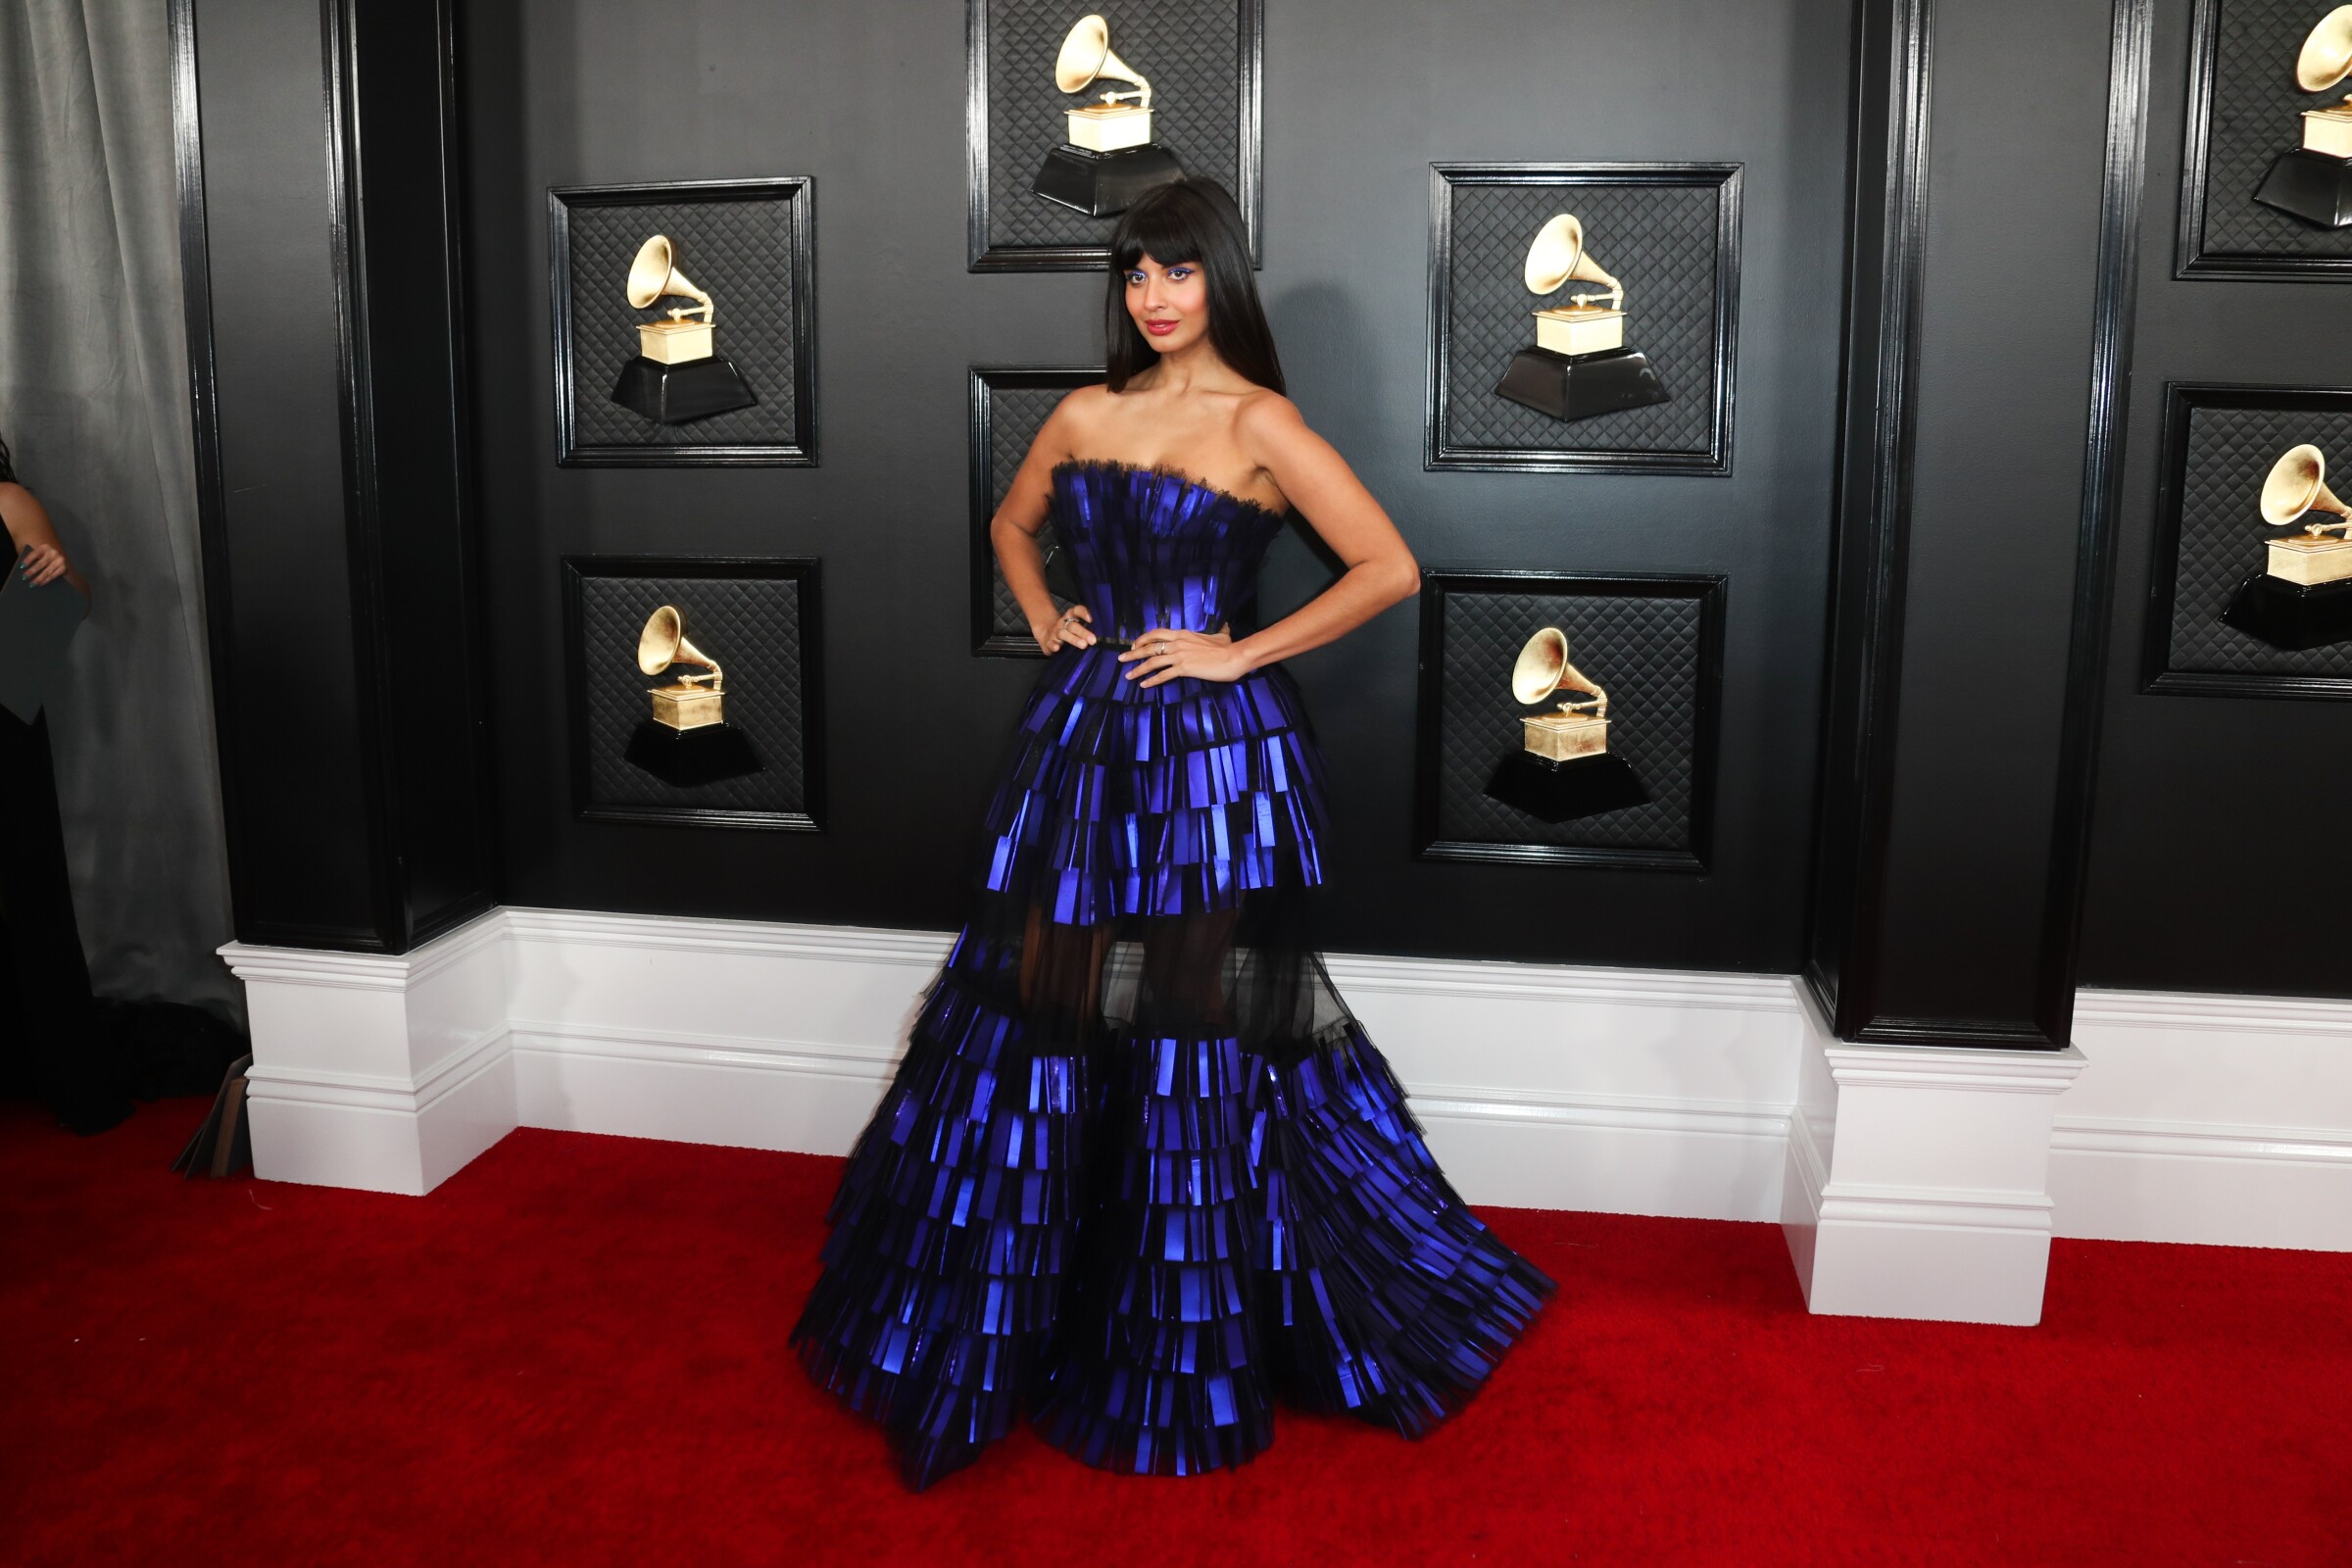 Grammys 2020 fashion hits and misses from the red carpet - Los Angeles Times